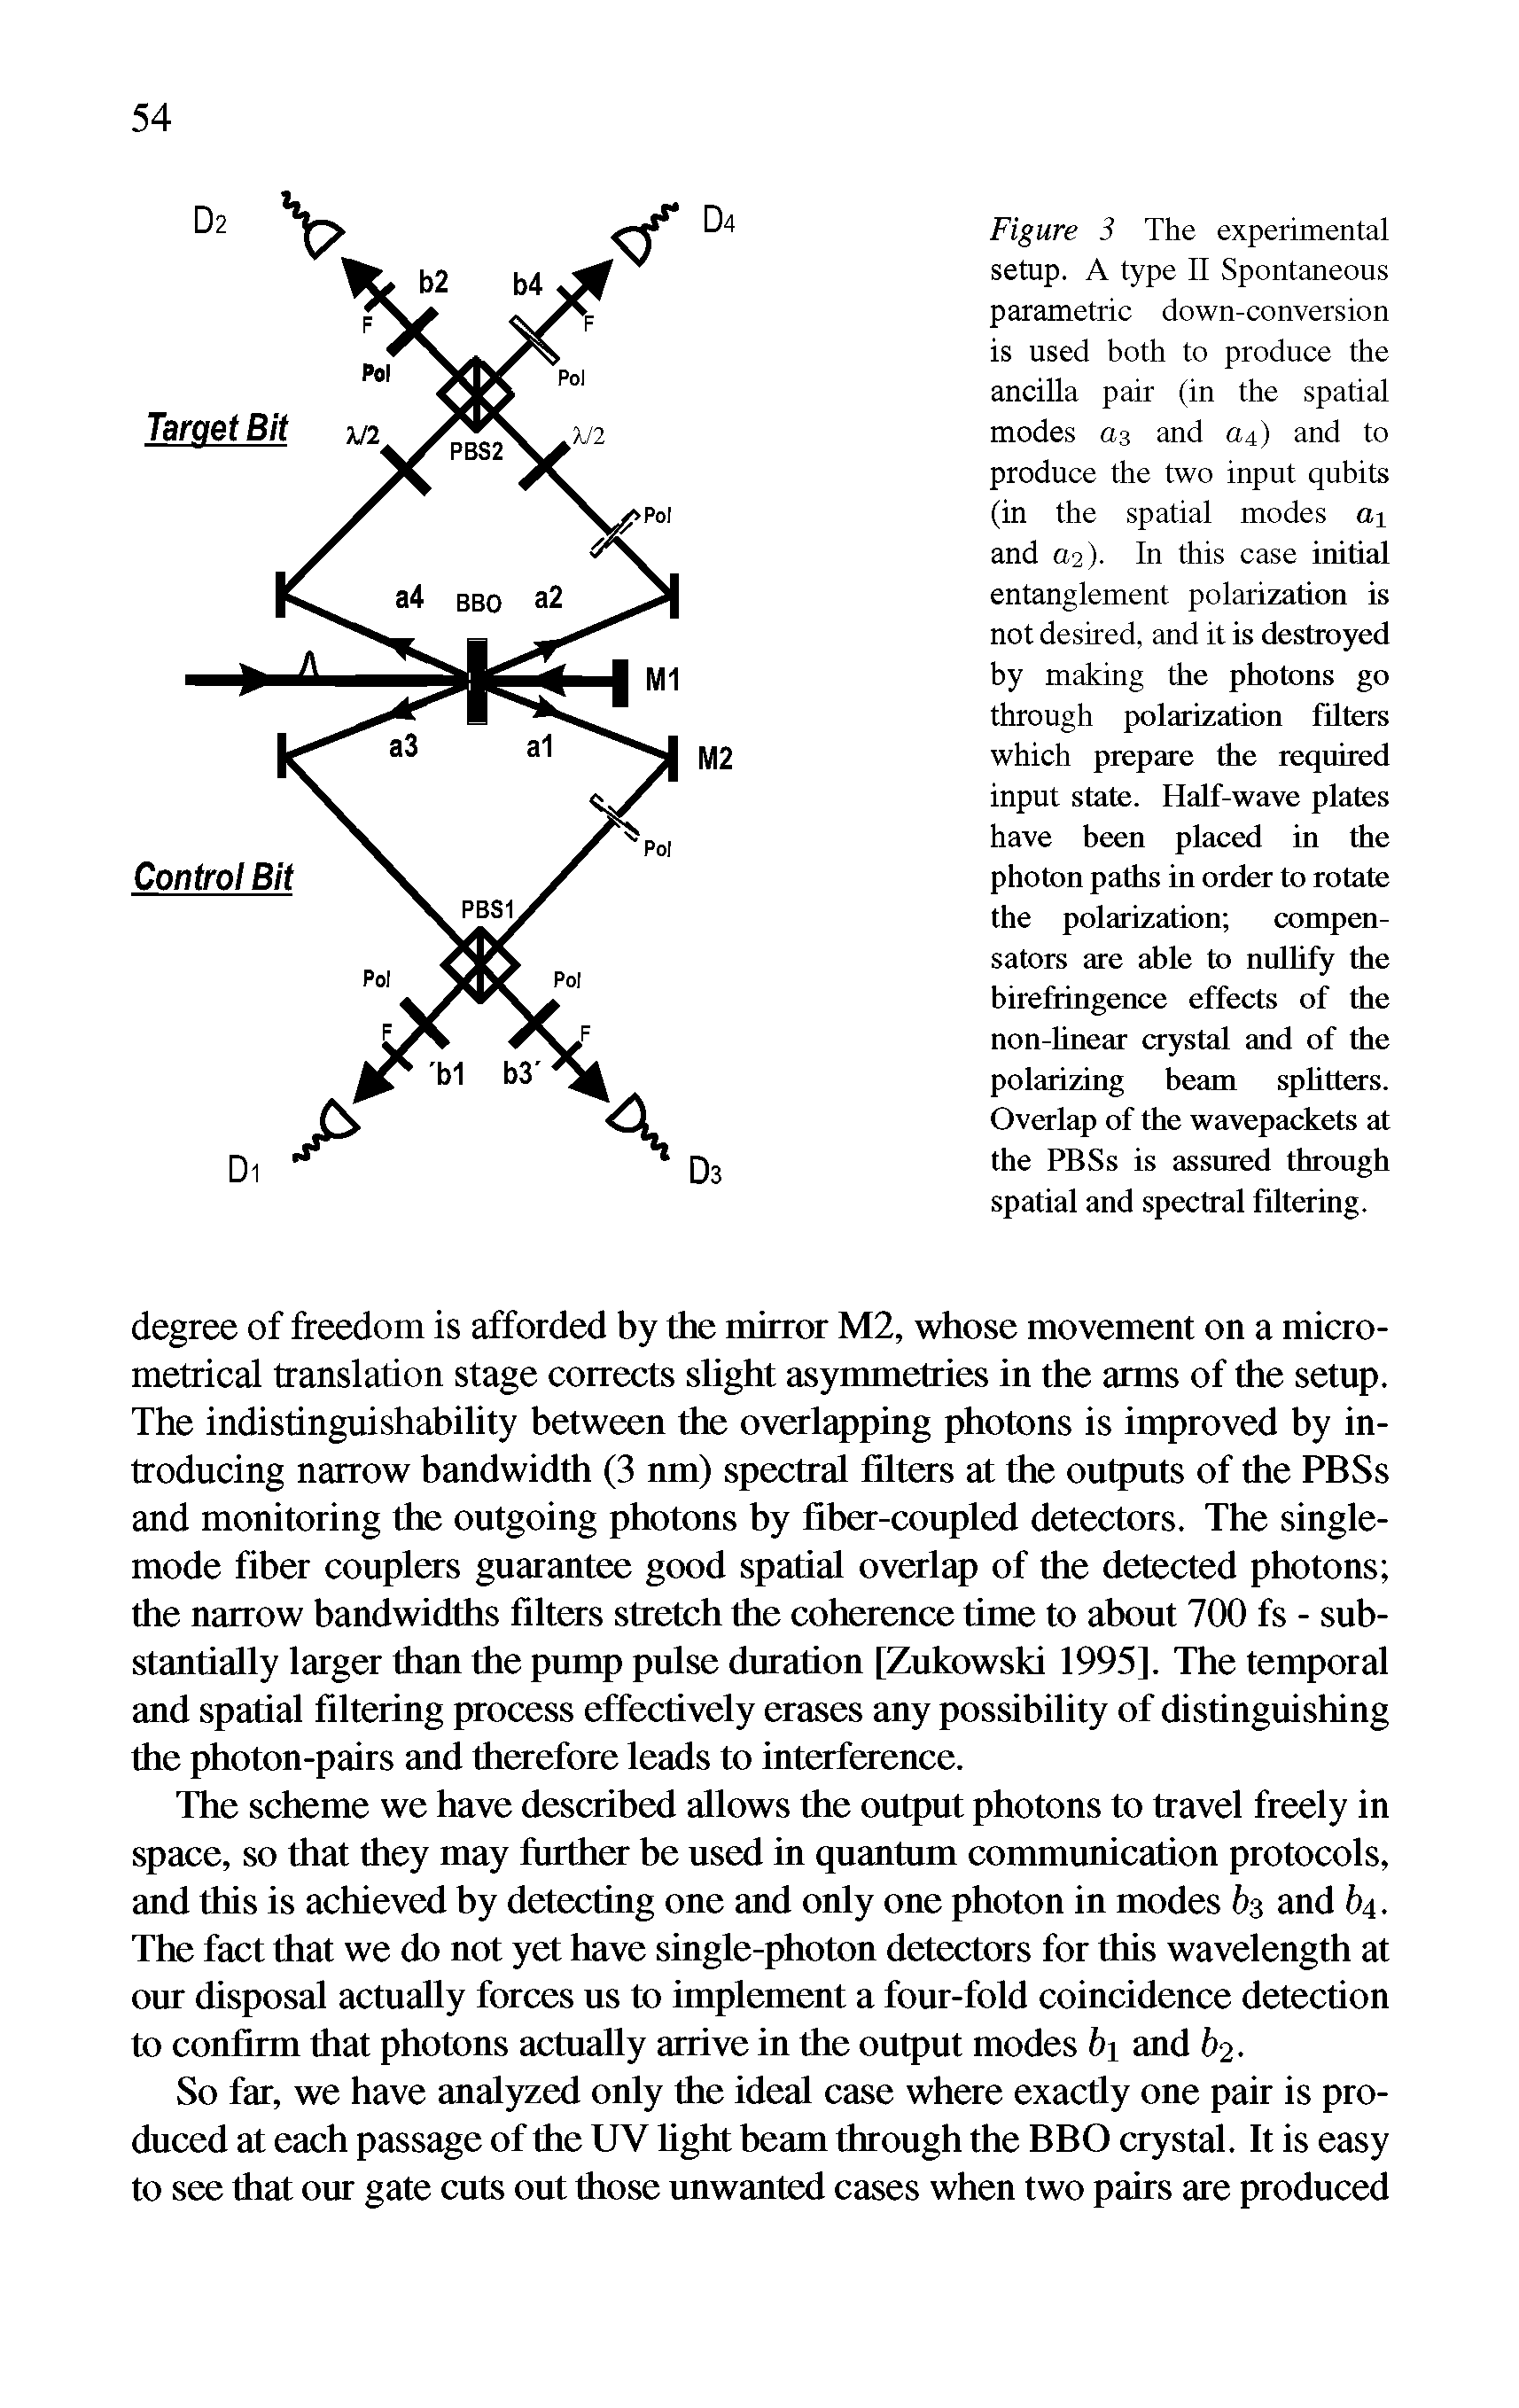 Figure 3 The experimental setup. A type II Spontaneous parametric down-conversion is used both to produce the ancilla pair (in the spatial modes <23 and a4) and to produce the two input qubits (in the spatial modes ai and 0,2). In this case initial entanglement polarization is not desired, and it is destroyed by making the photons go through polarization filters which prepare the required input state. Half-wave plates have been placed in the photon paths in order to rotate the polarization compensators are able to nullify the birefringence effects of the non-linear crystal and of the polarizing beam splitters. Overlap of the wavepackets at the PBSs is assured through spatial and spectral filtering.